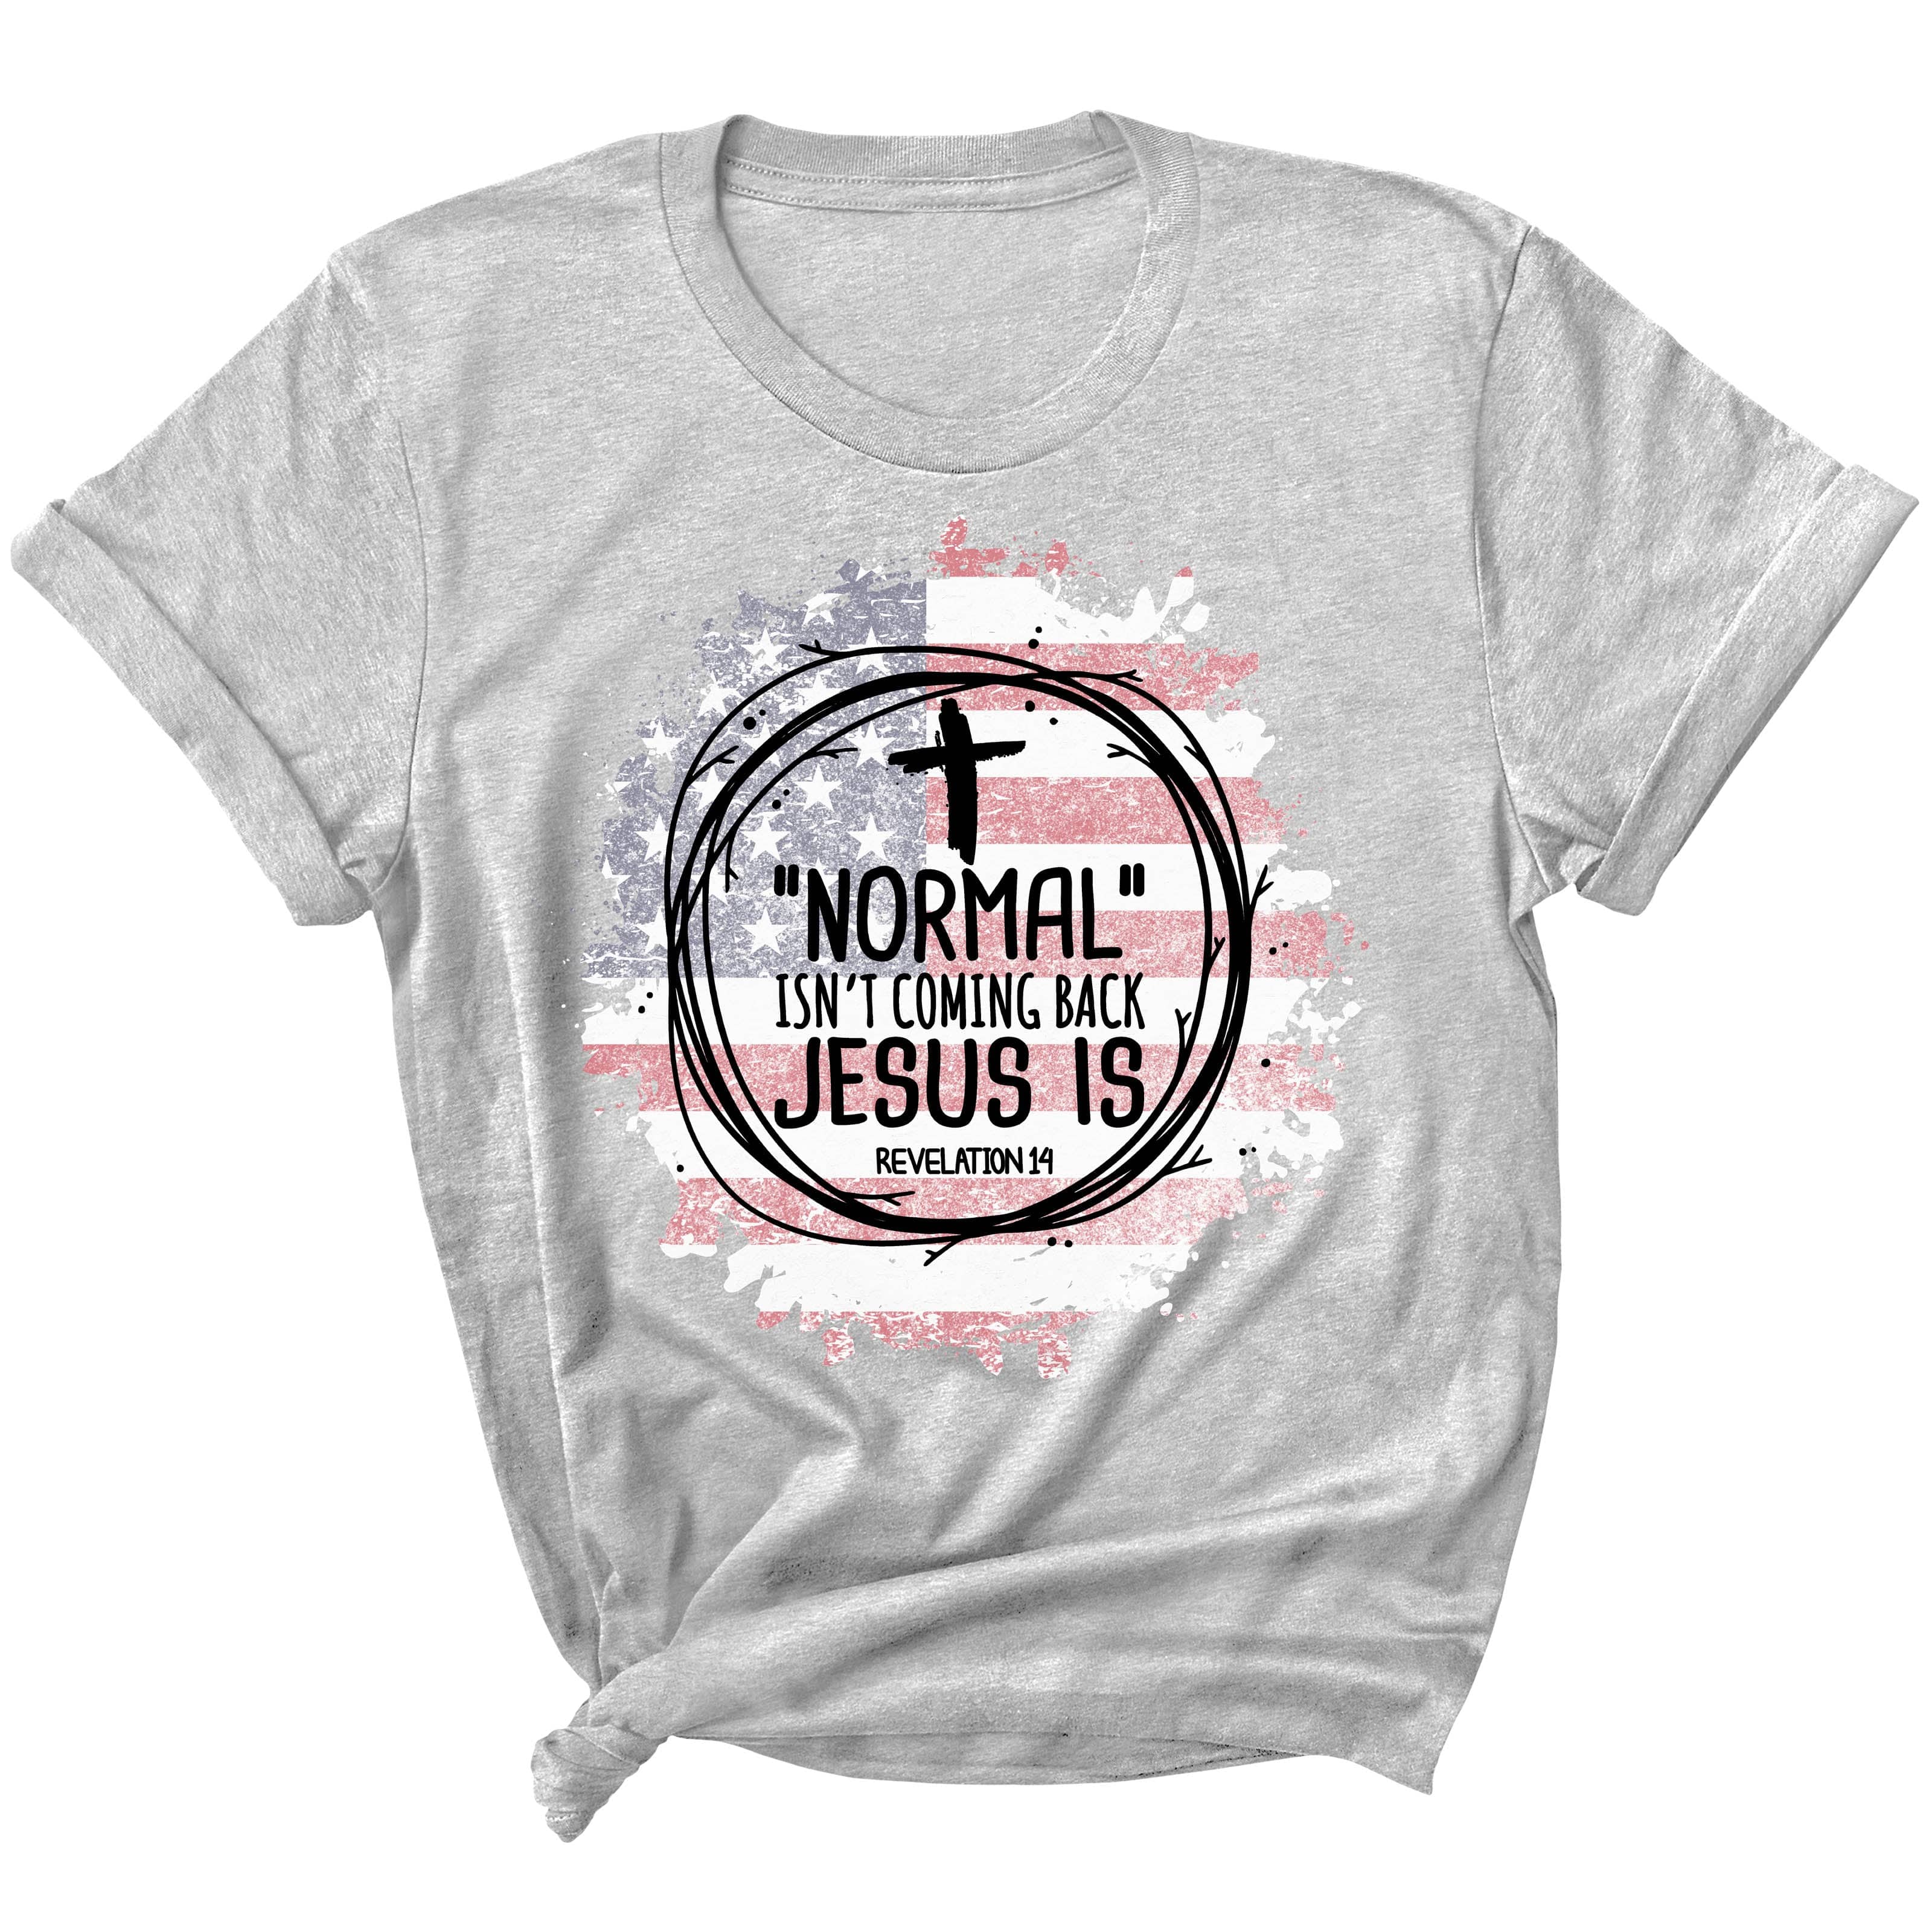 Normal Isn't Coming Back Jesus Is Women's Graphic Print T-Shirt